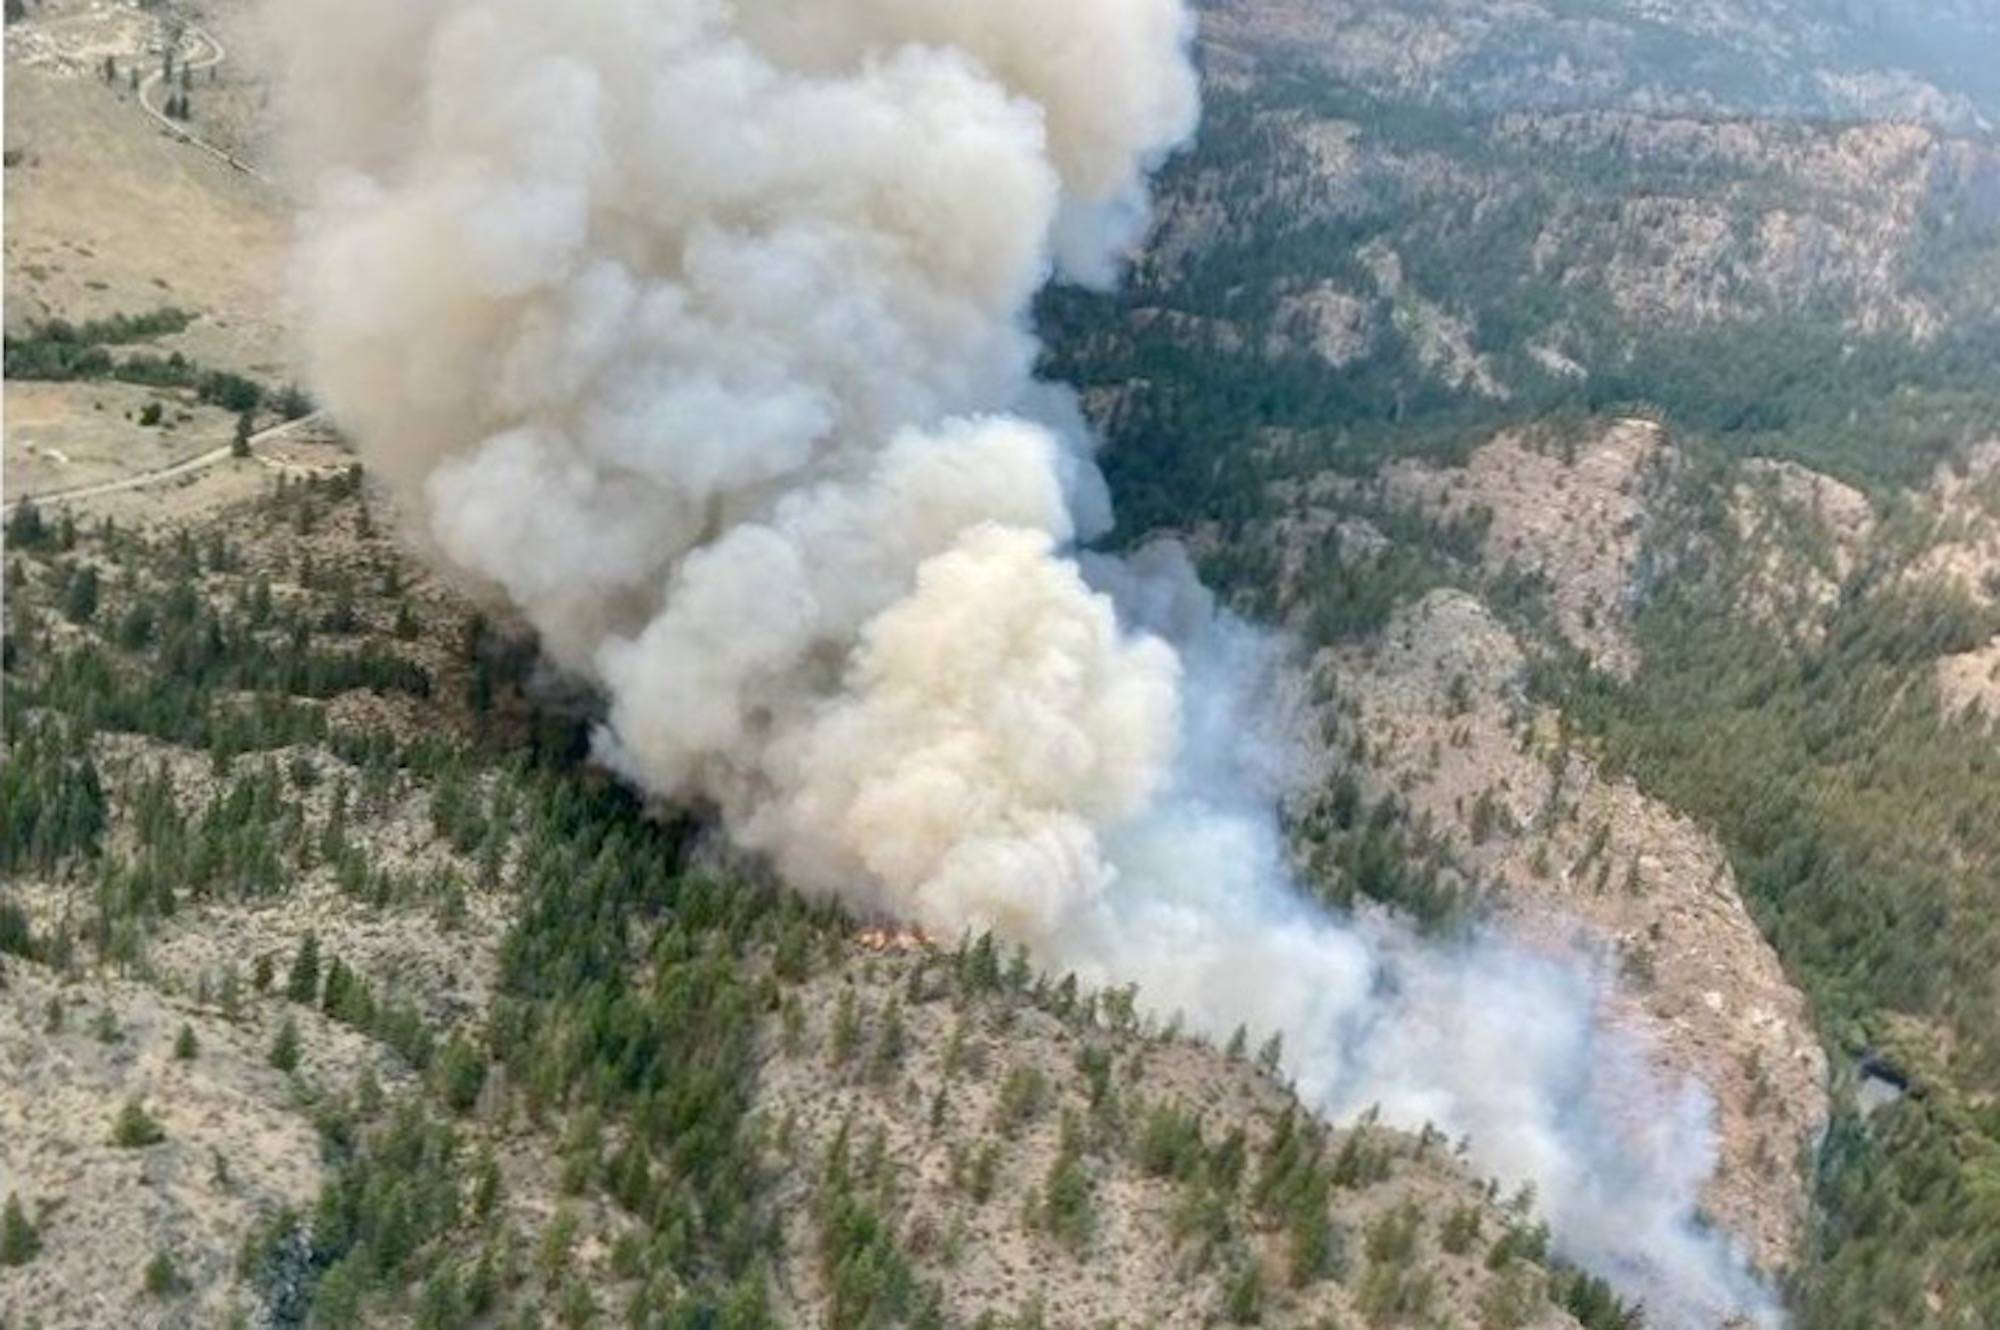 The BC Wildfire Service reports the Inkaneep Creek fire is burning aggressively and is now at 300 hectares in size. (BC Wildfire Service photo)